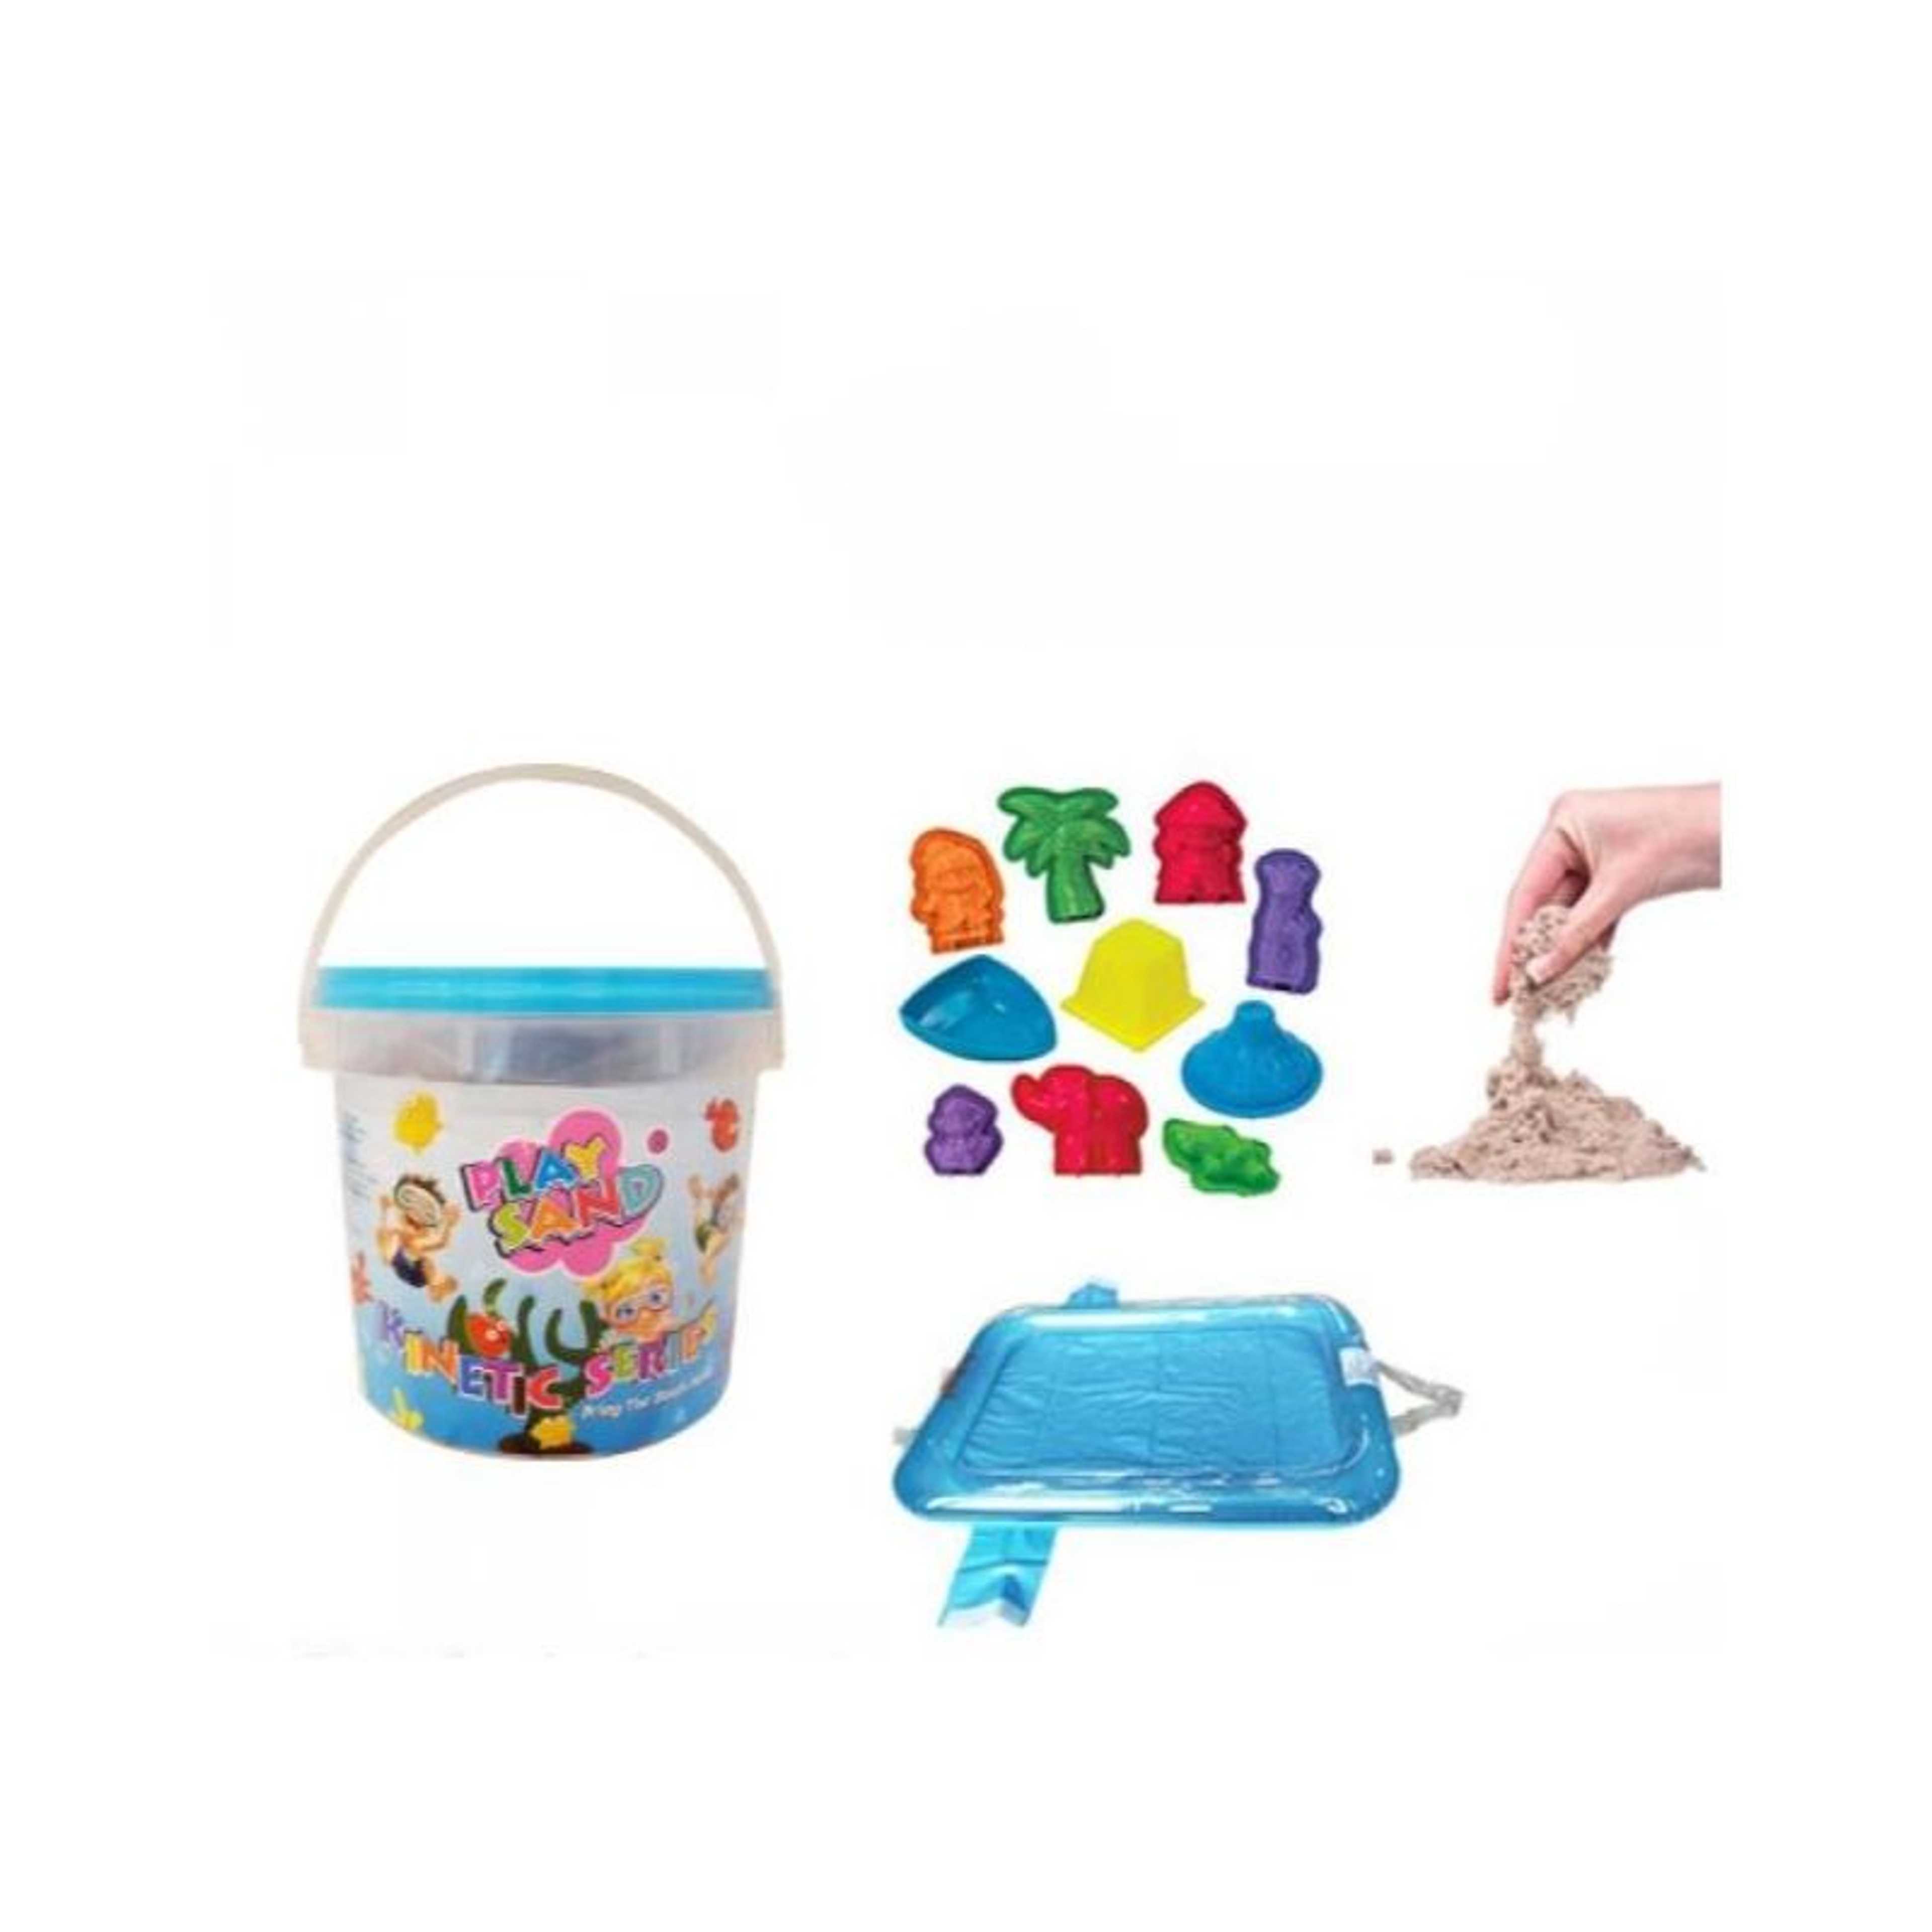 Bucket of assorted Color Play Sand with Molds